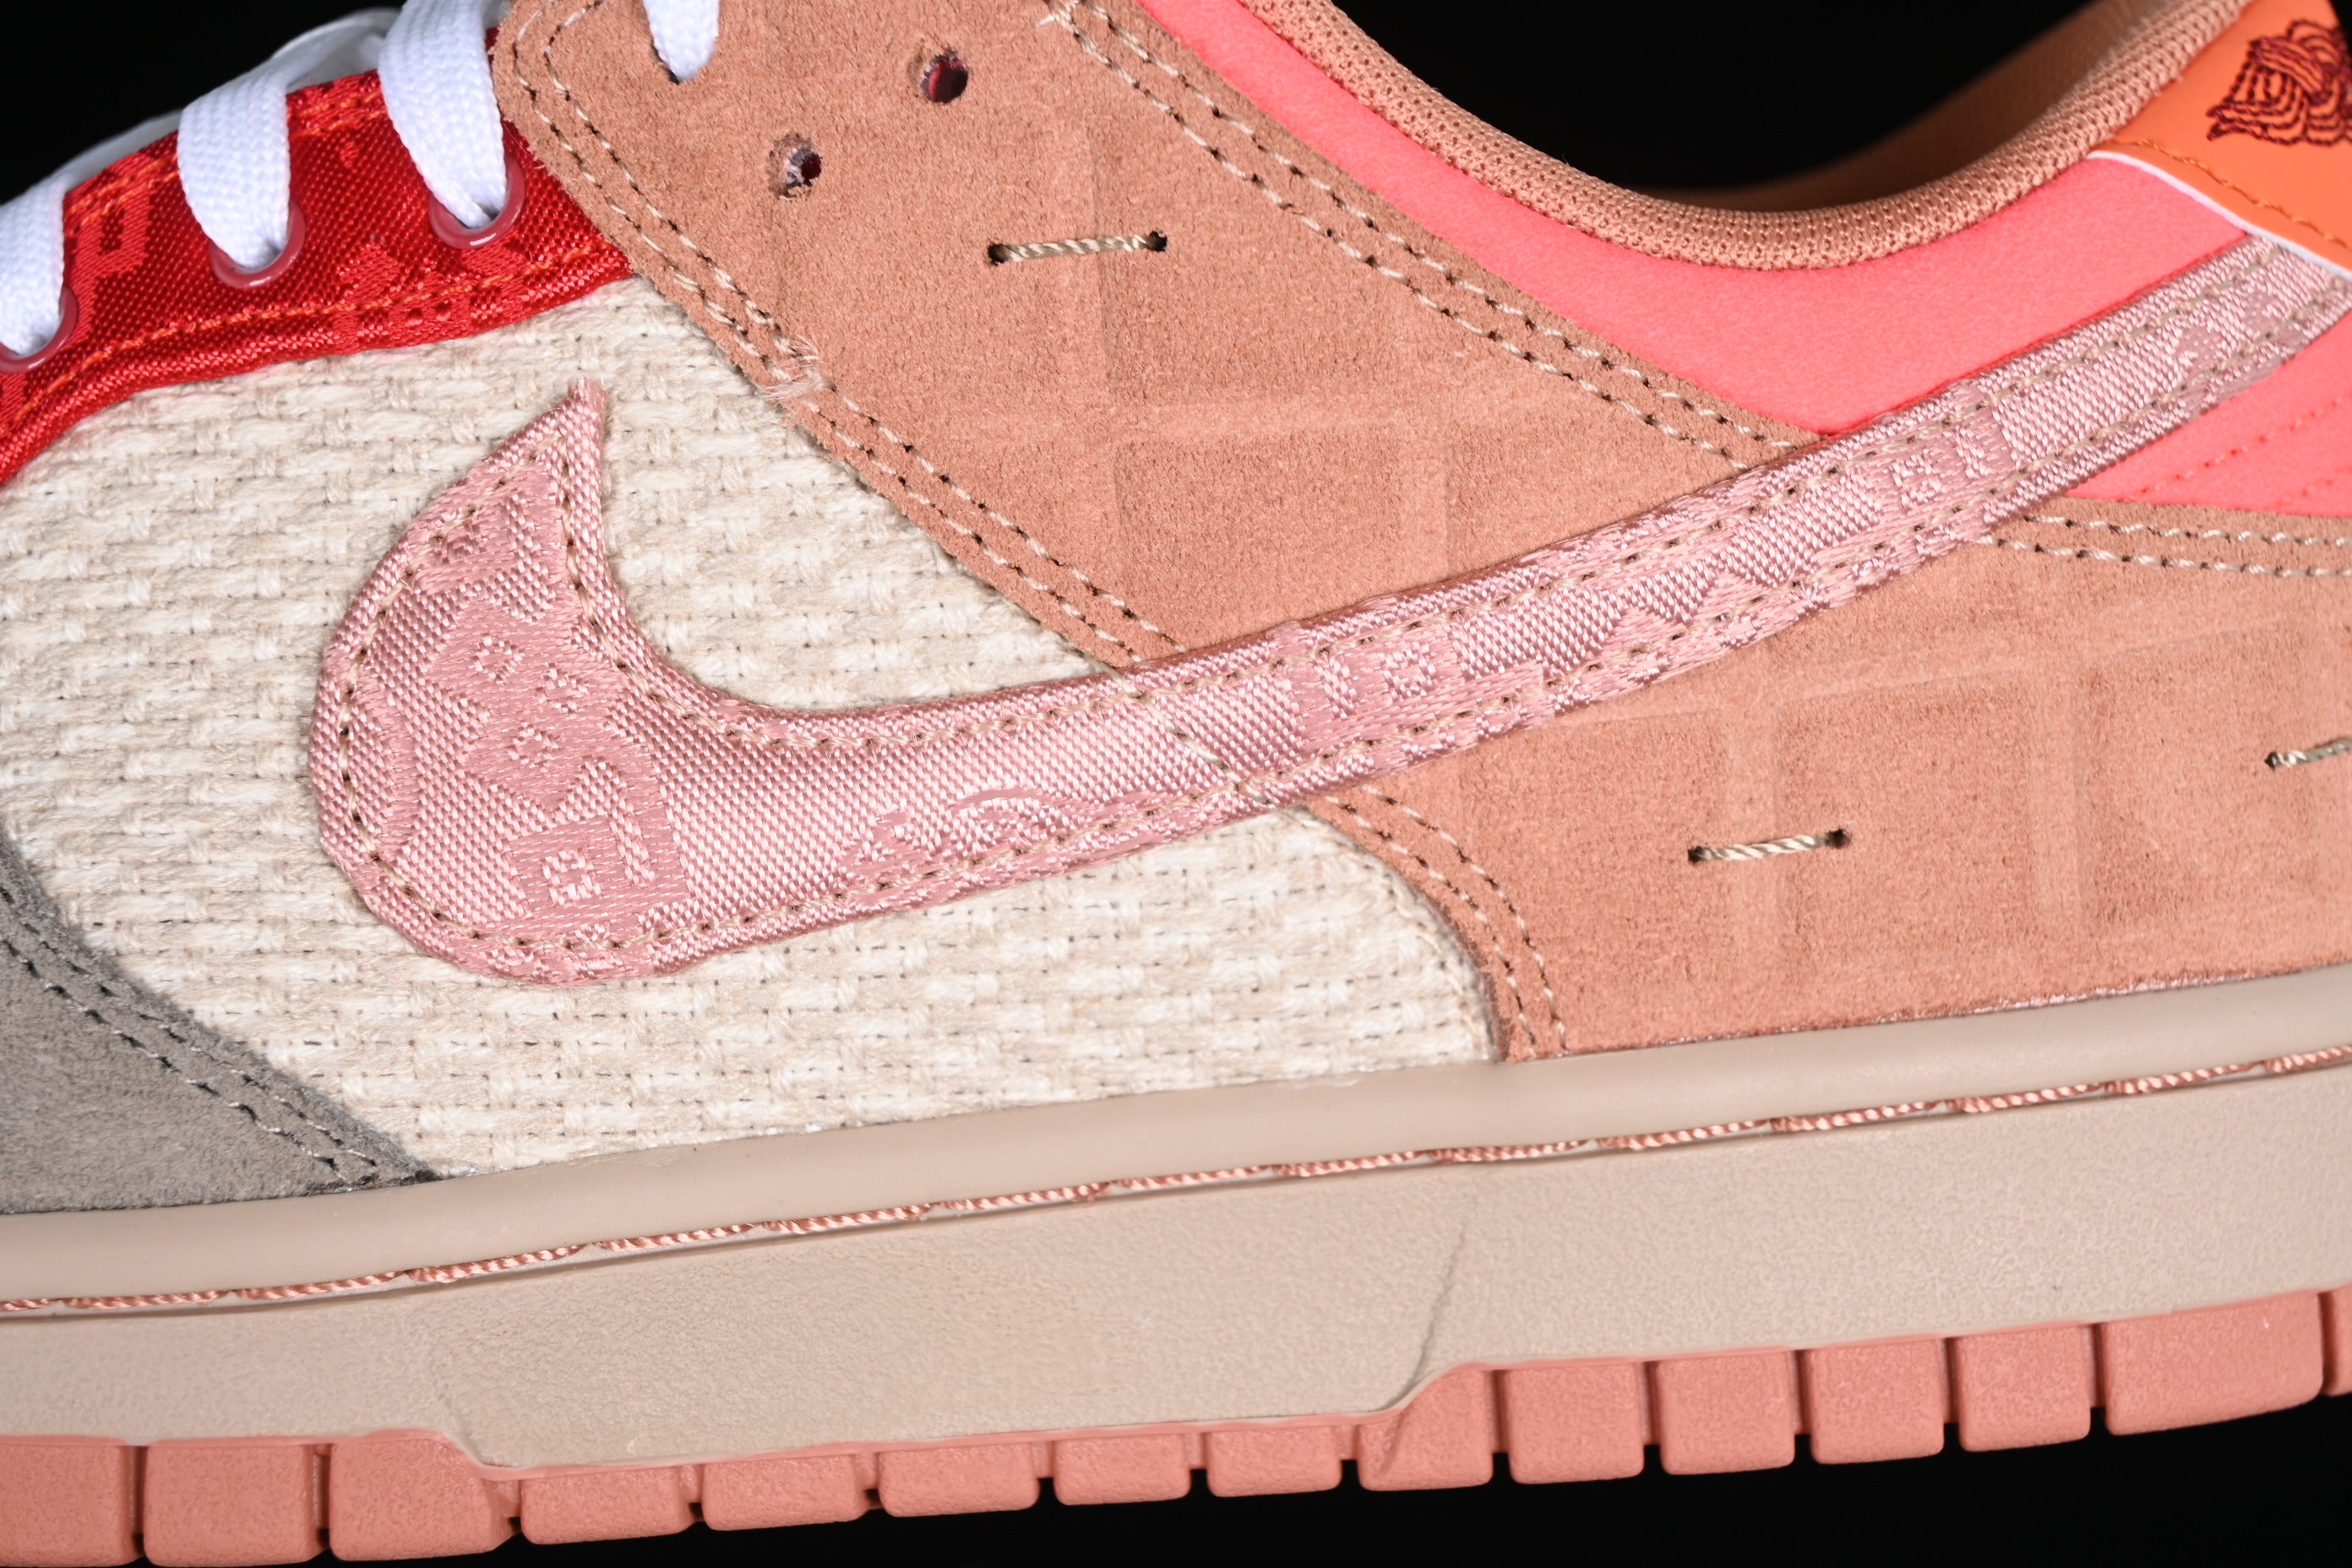 CLOT x NikeMens Dunk Low - What The